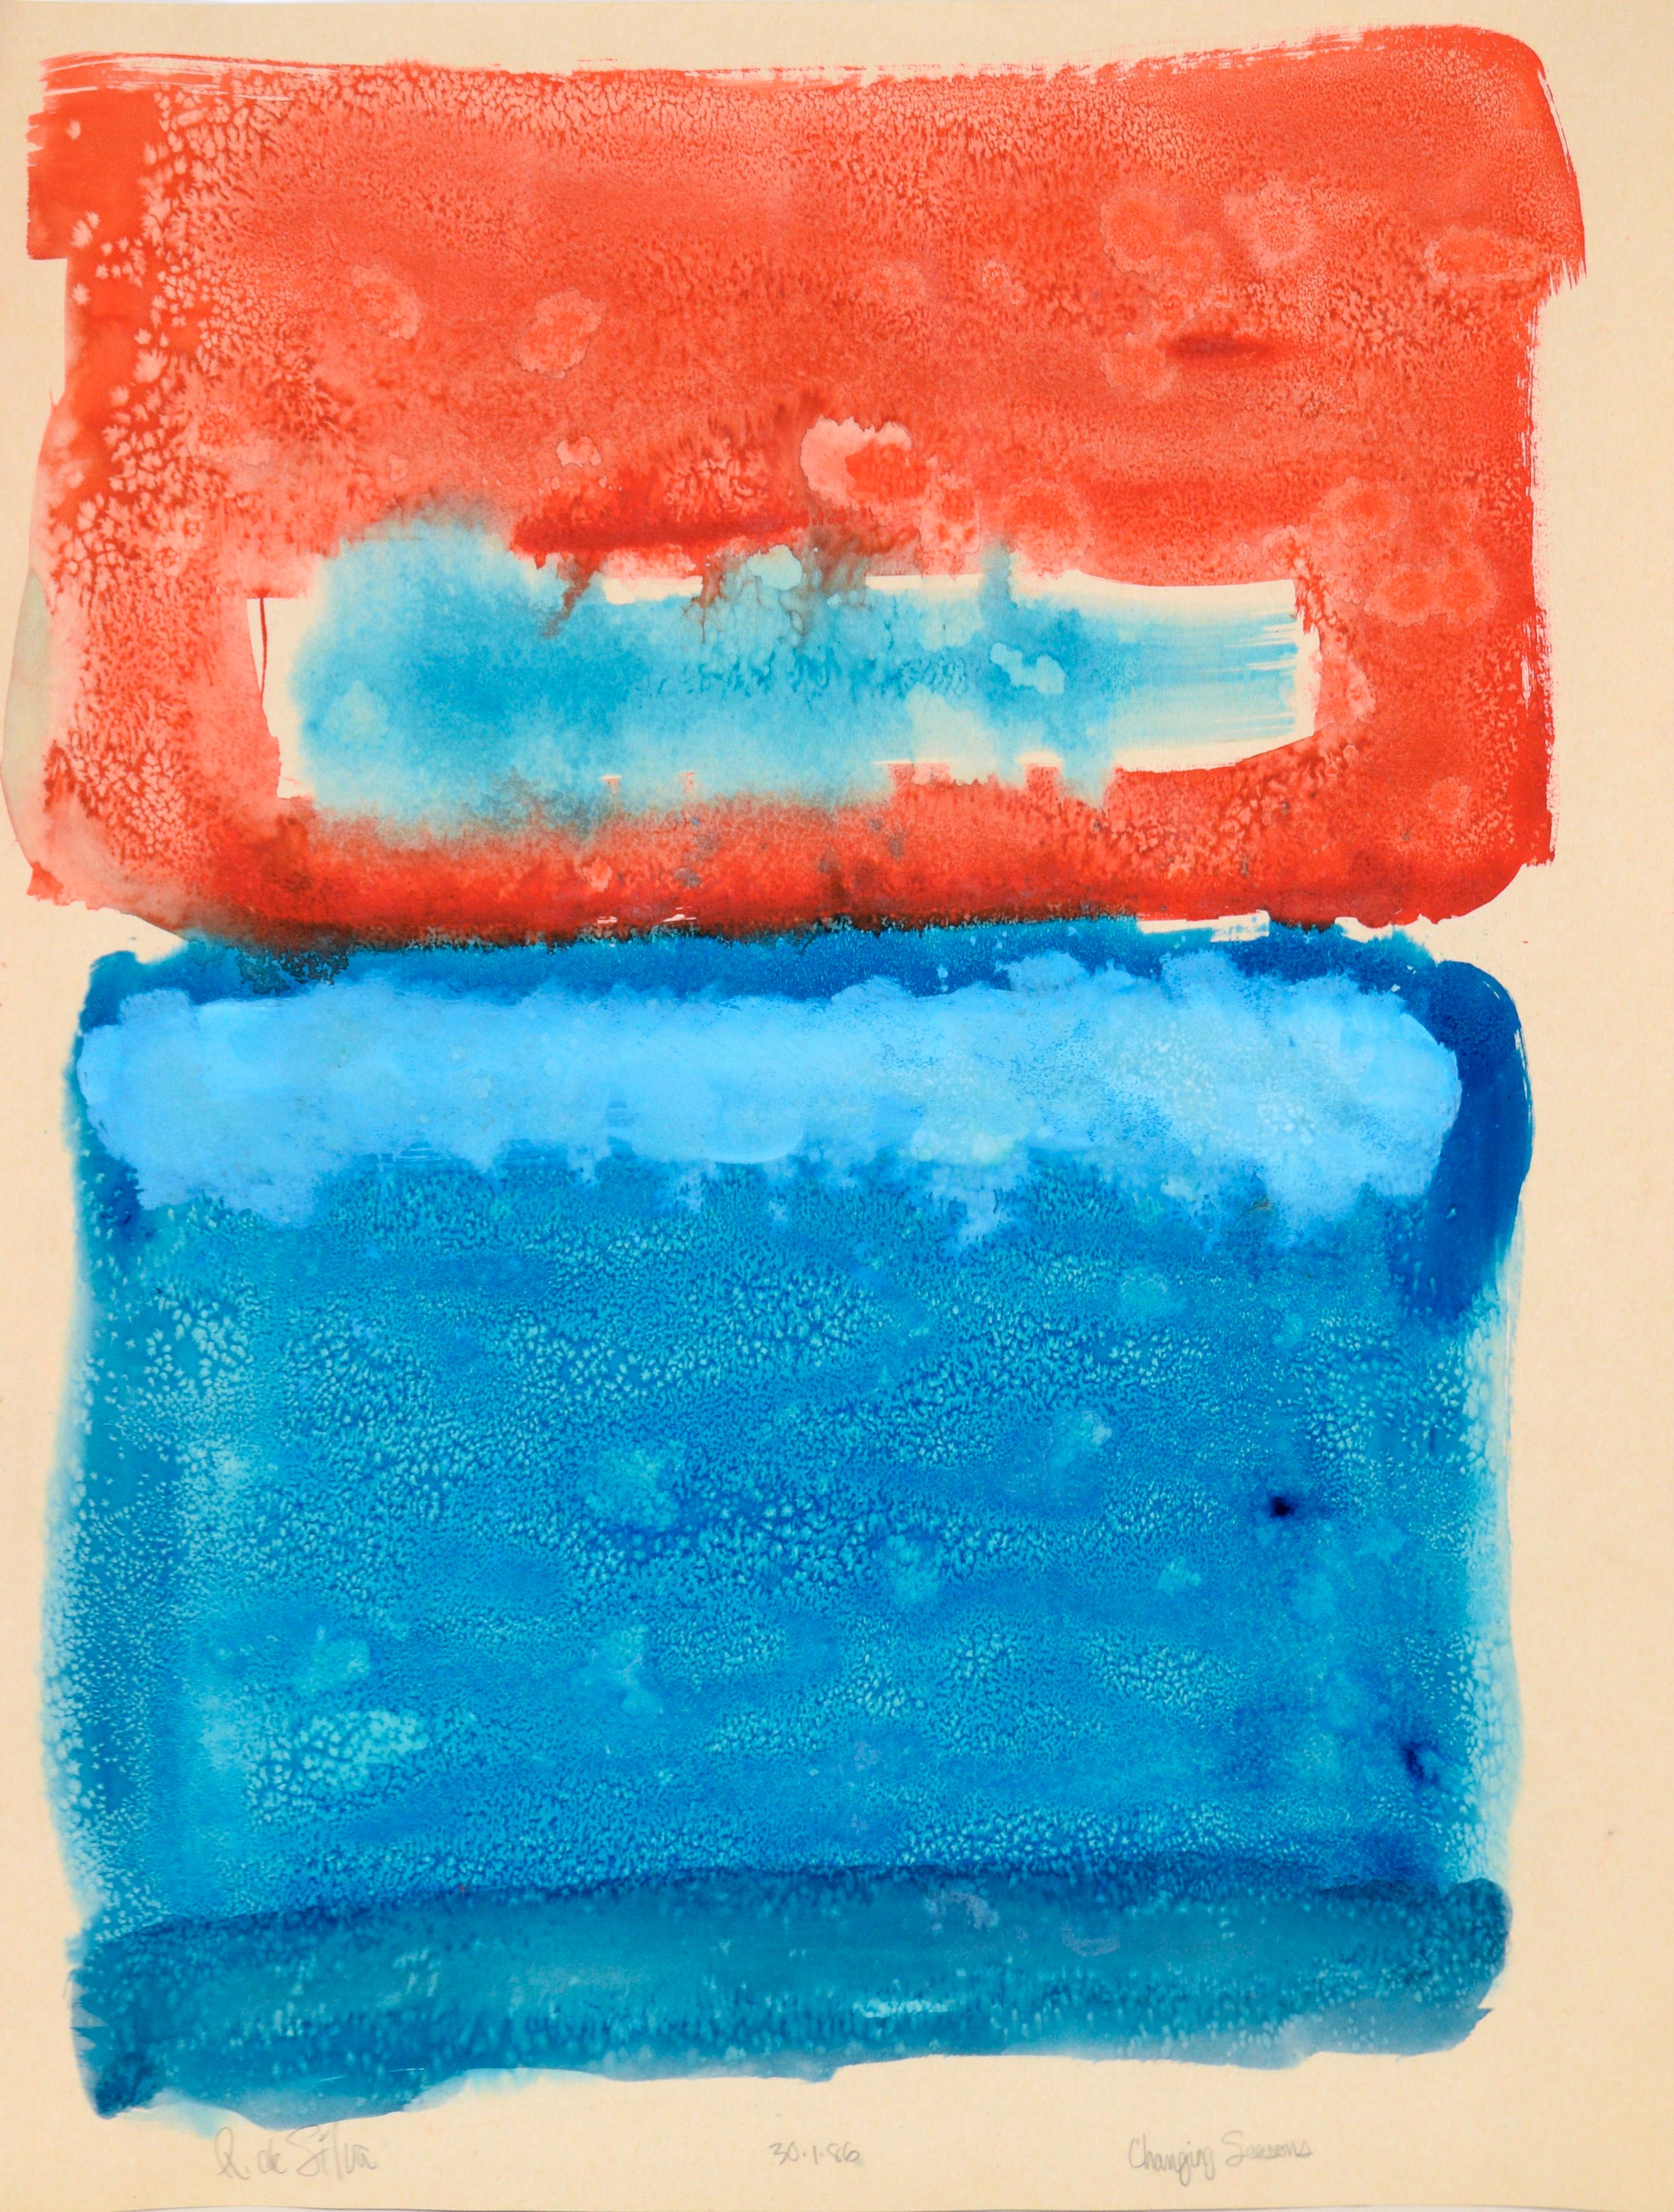 Ricardo de Silva Abstract Painting - "Changing Seasons" - Red Over Blue Tribute to Mark Rothko in Acrylic on Paper